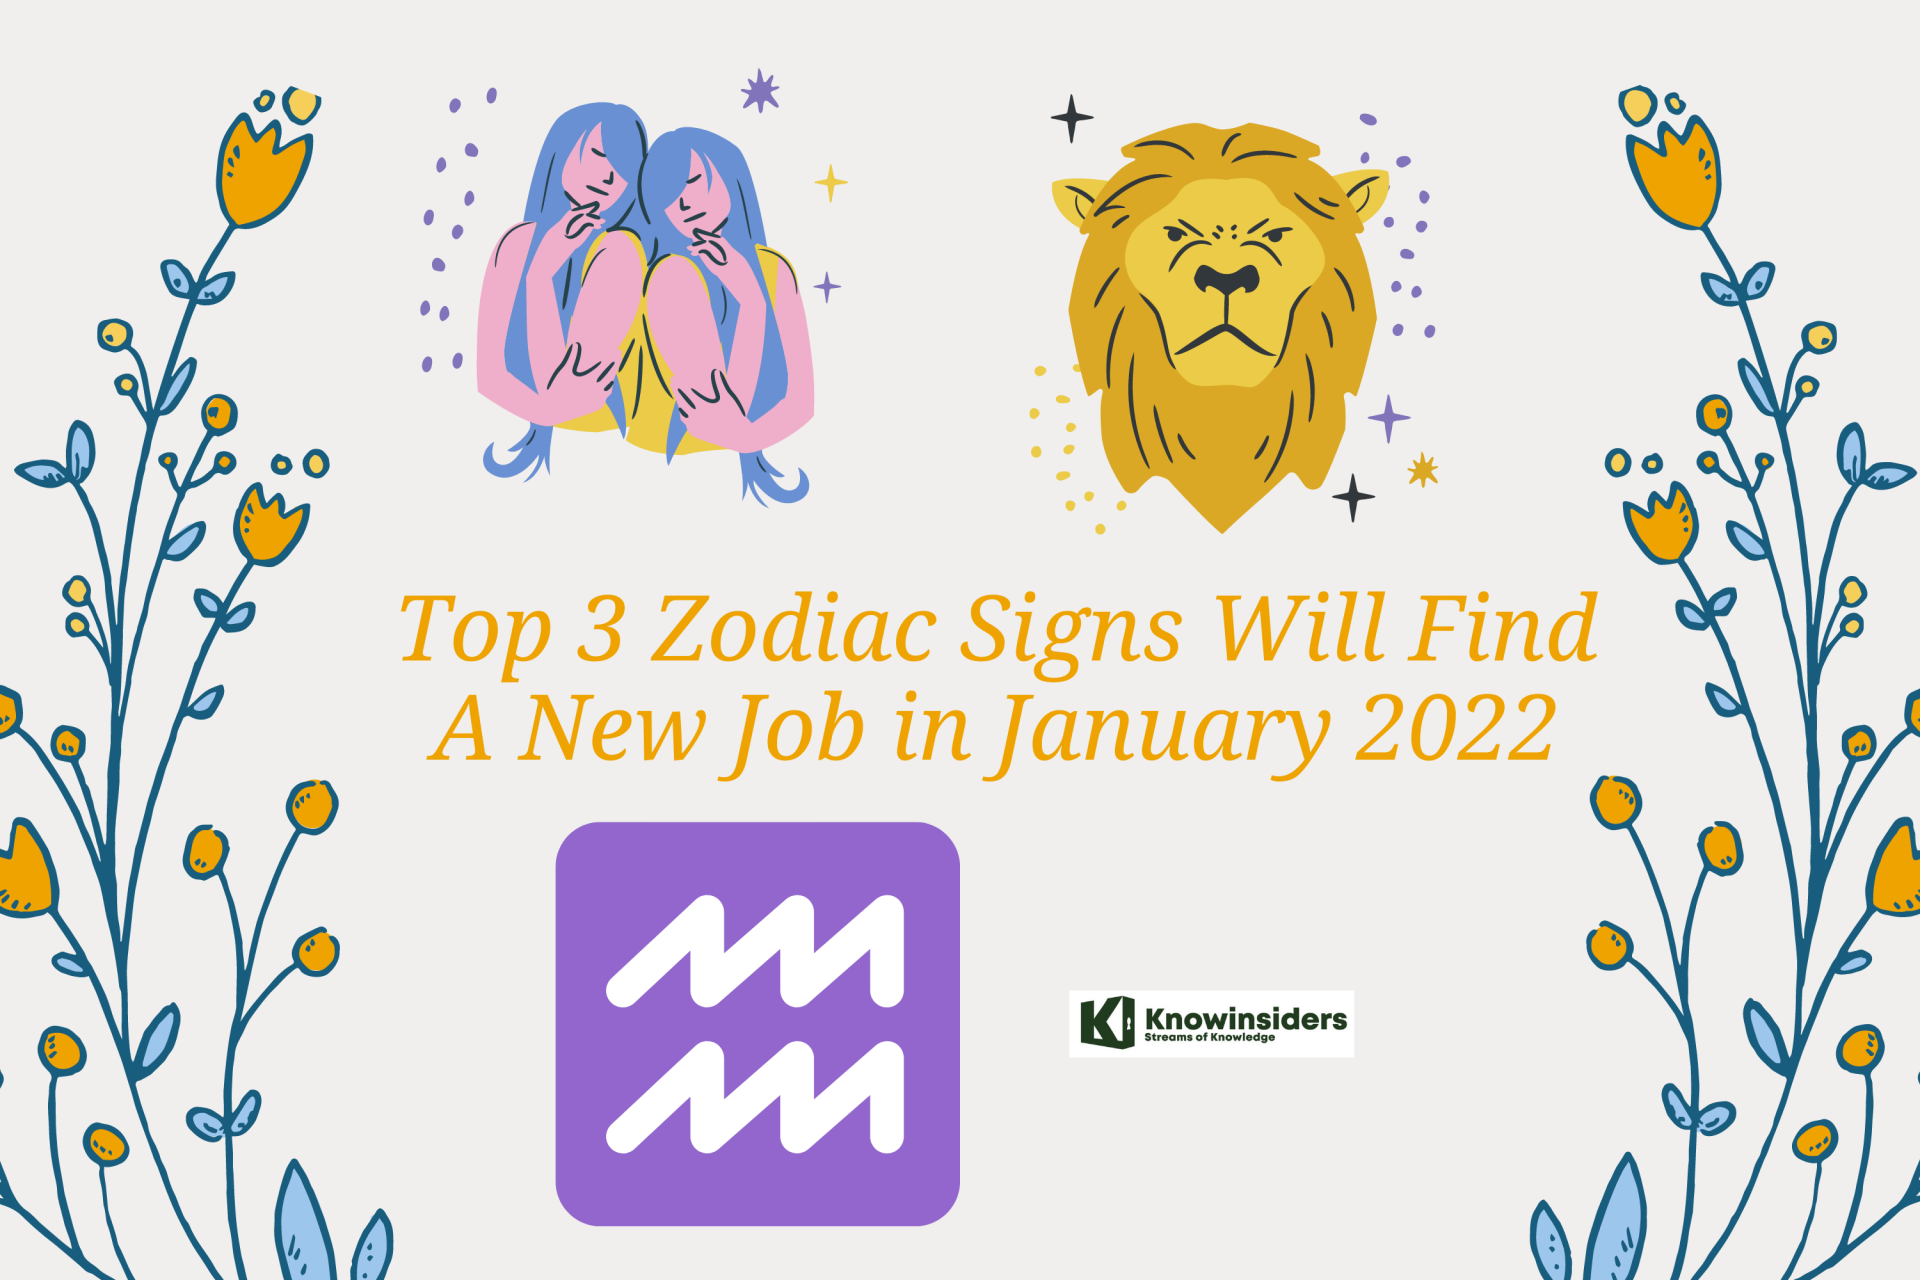 Zodiac signs will find new job in January 2022. Photo: KnowInsiders